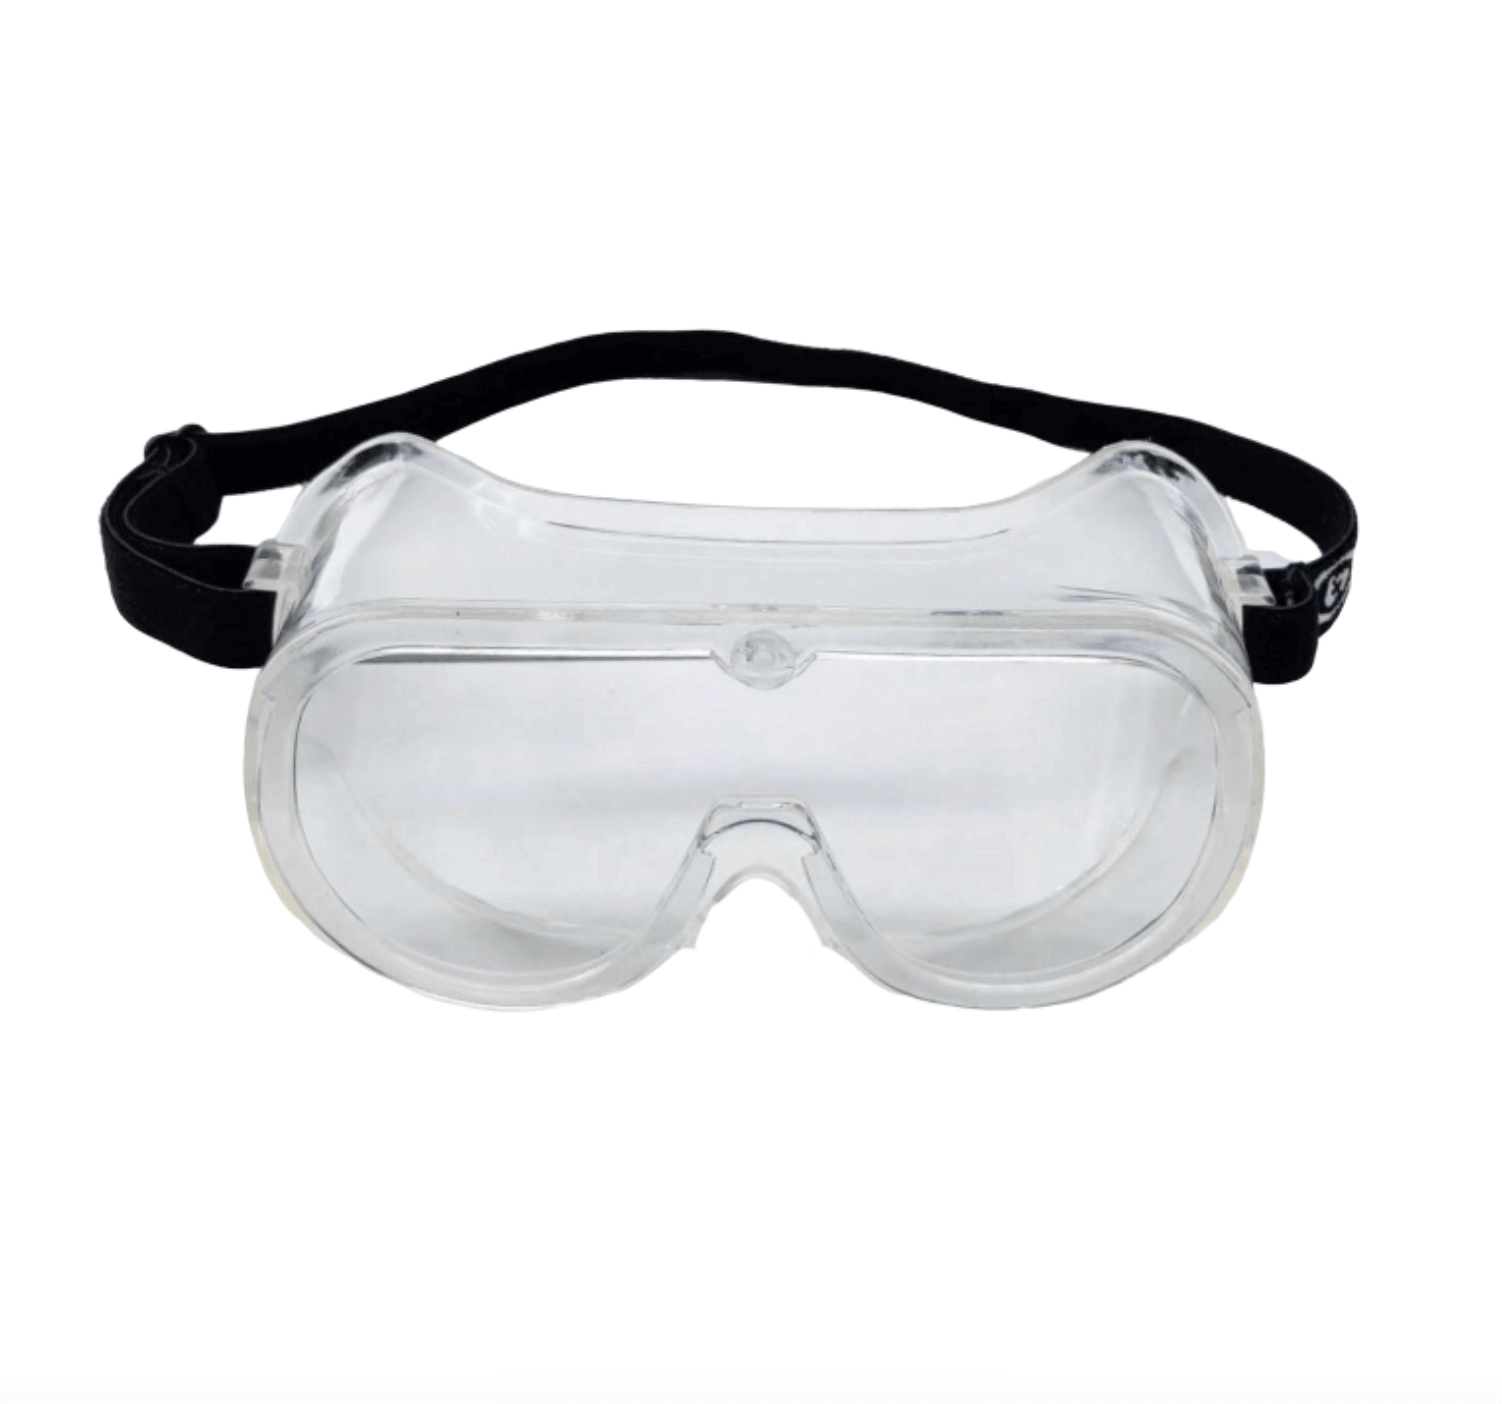 safety goggles - safety glasses - Medical Goggles - Protective eyewear - safety goggles supplier